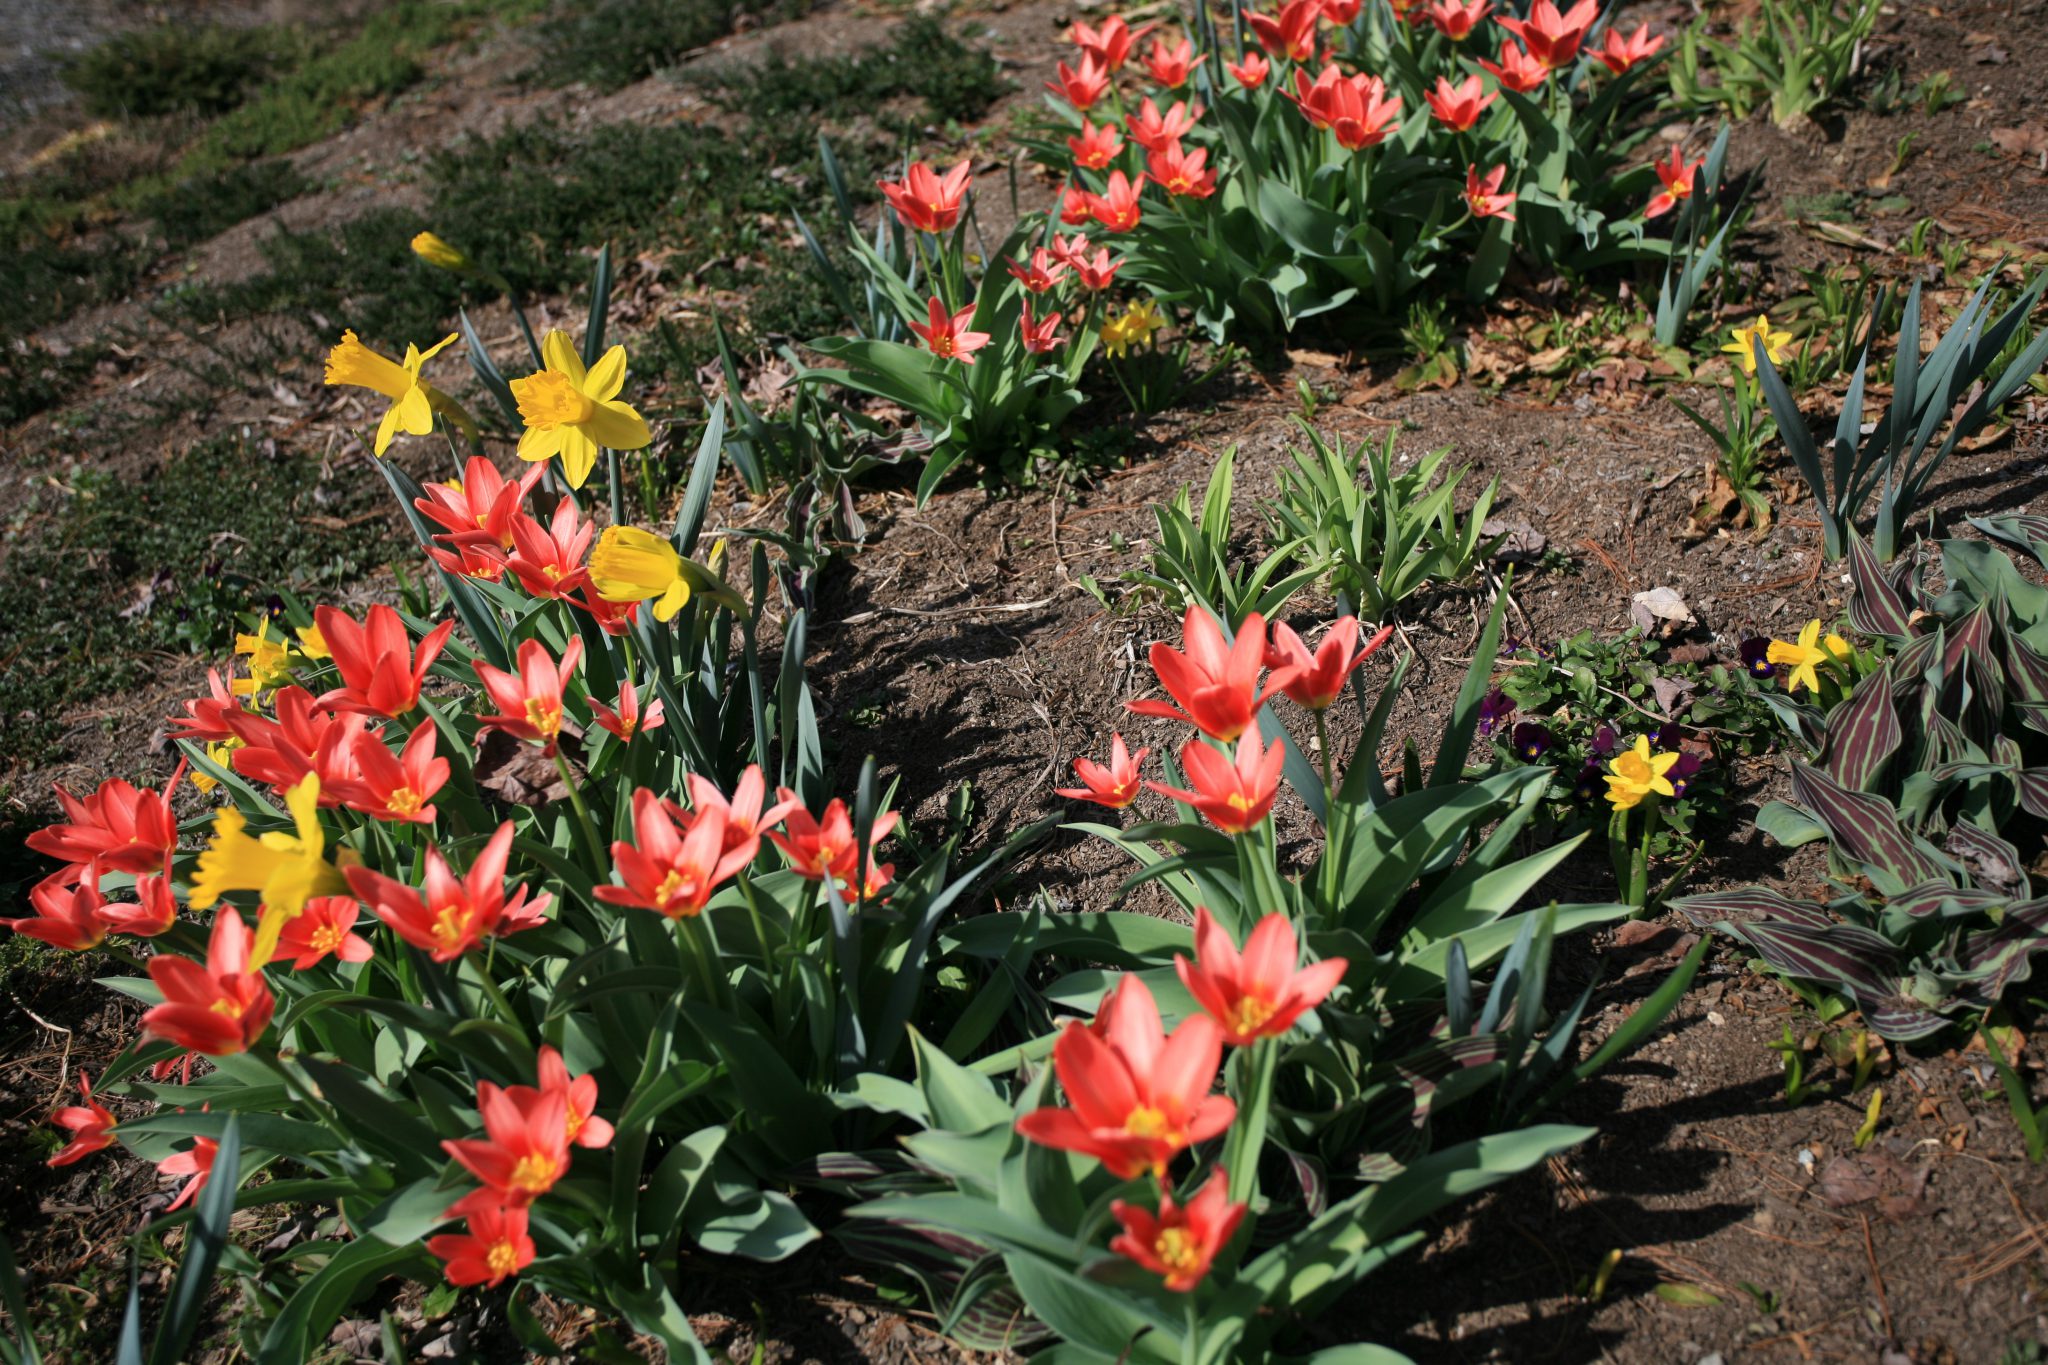 The petals on these Tulips open to the sunlight, and close as evening approaches.